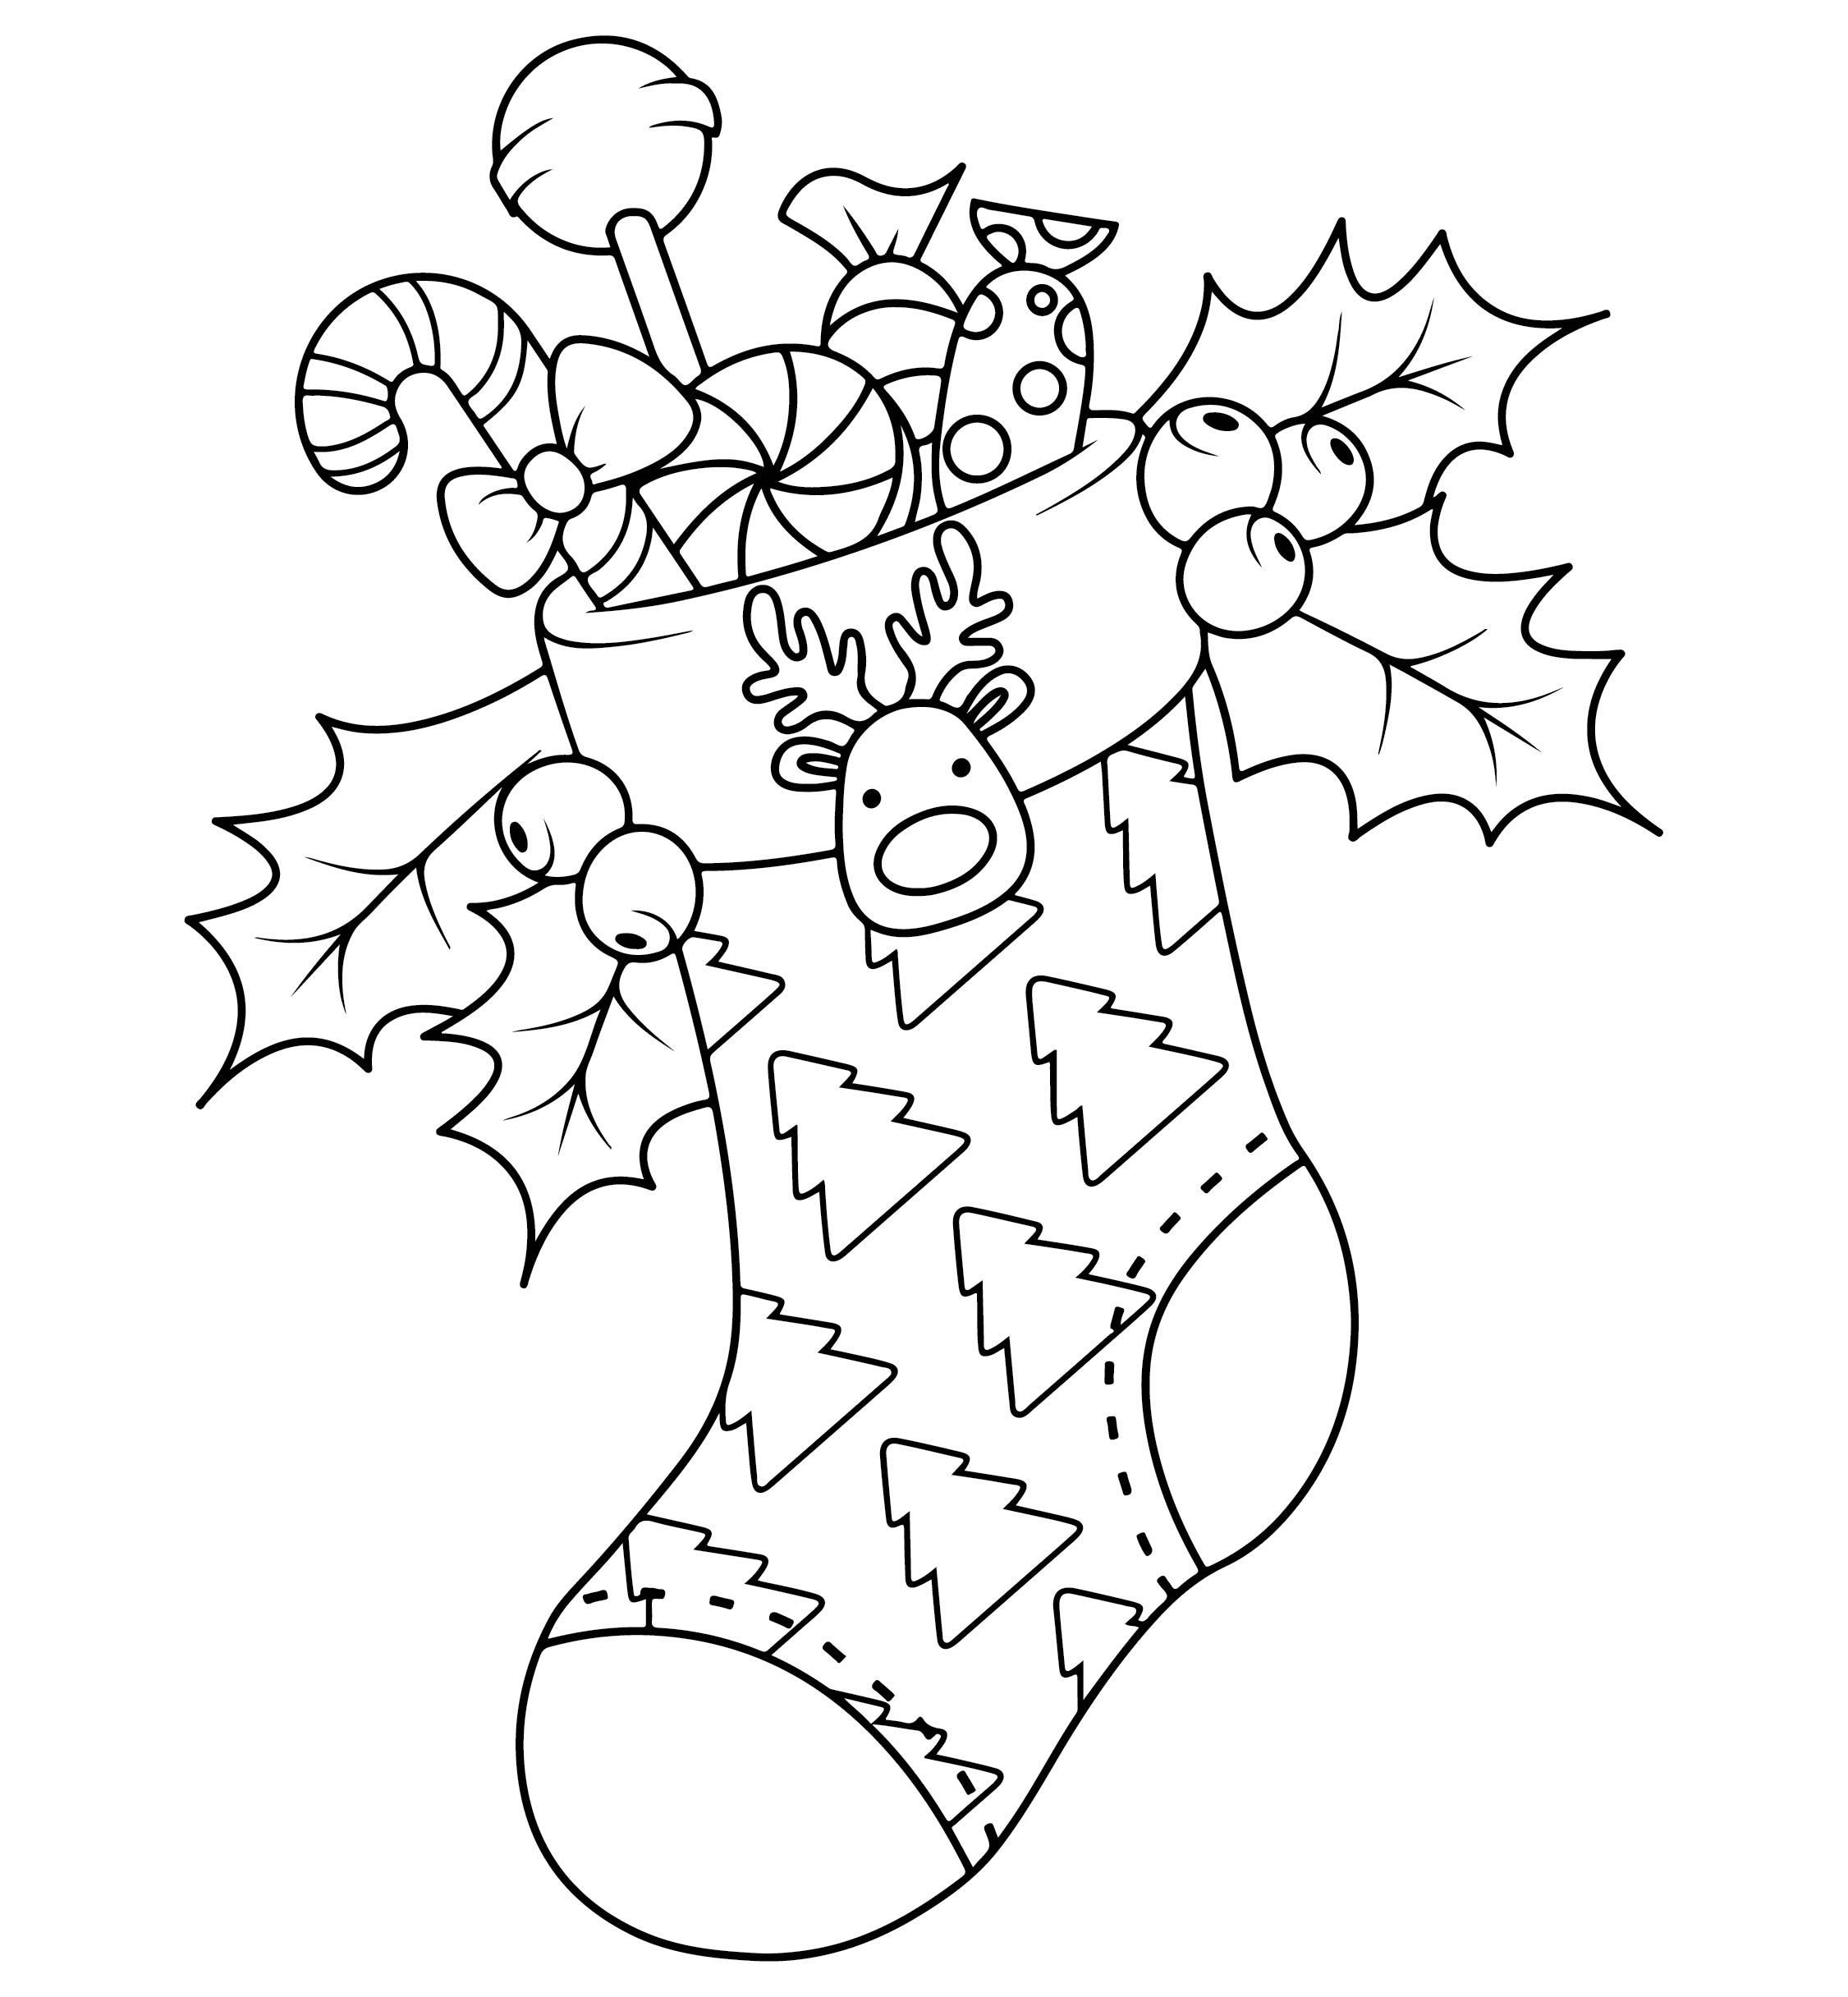 15 Best Christmas Stocking Coloring Pages Printable PDF For Free At Printablee